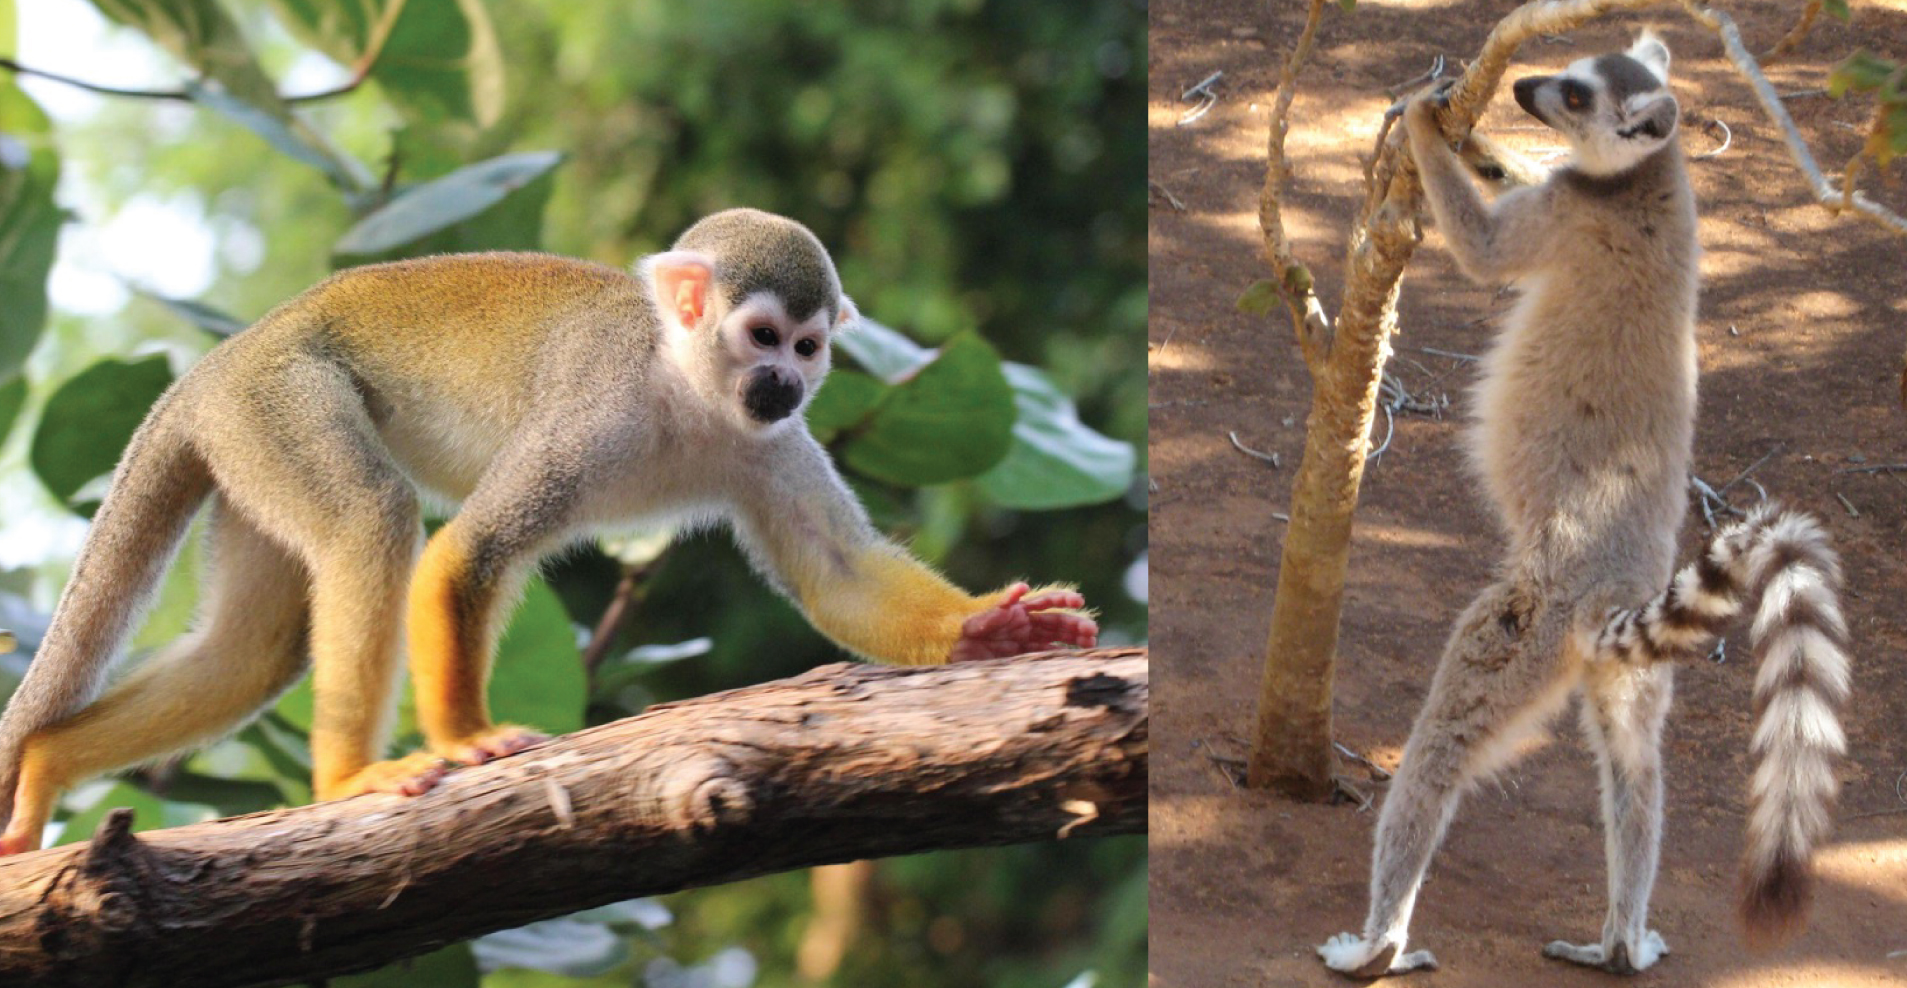 A squirrel monkey. A ring-tailed lemur.